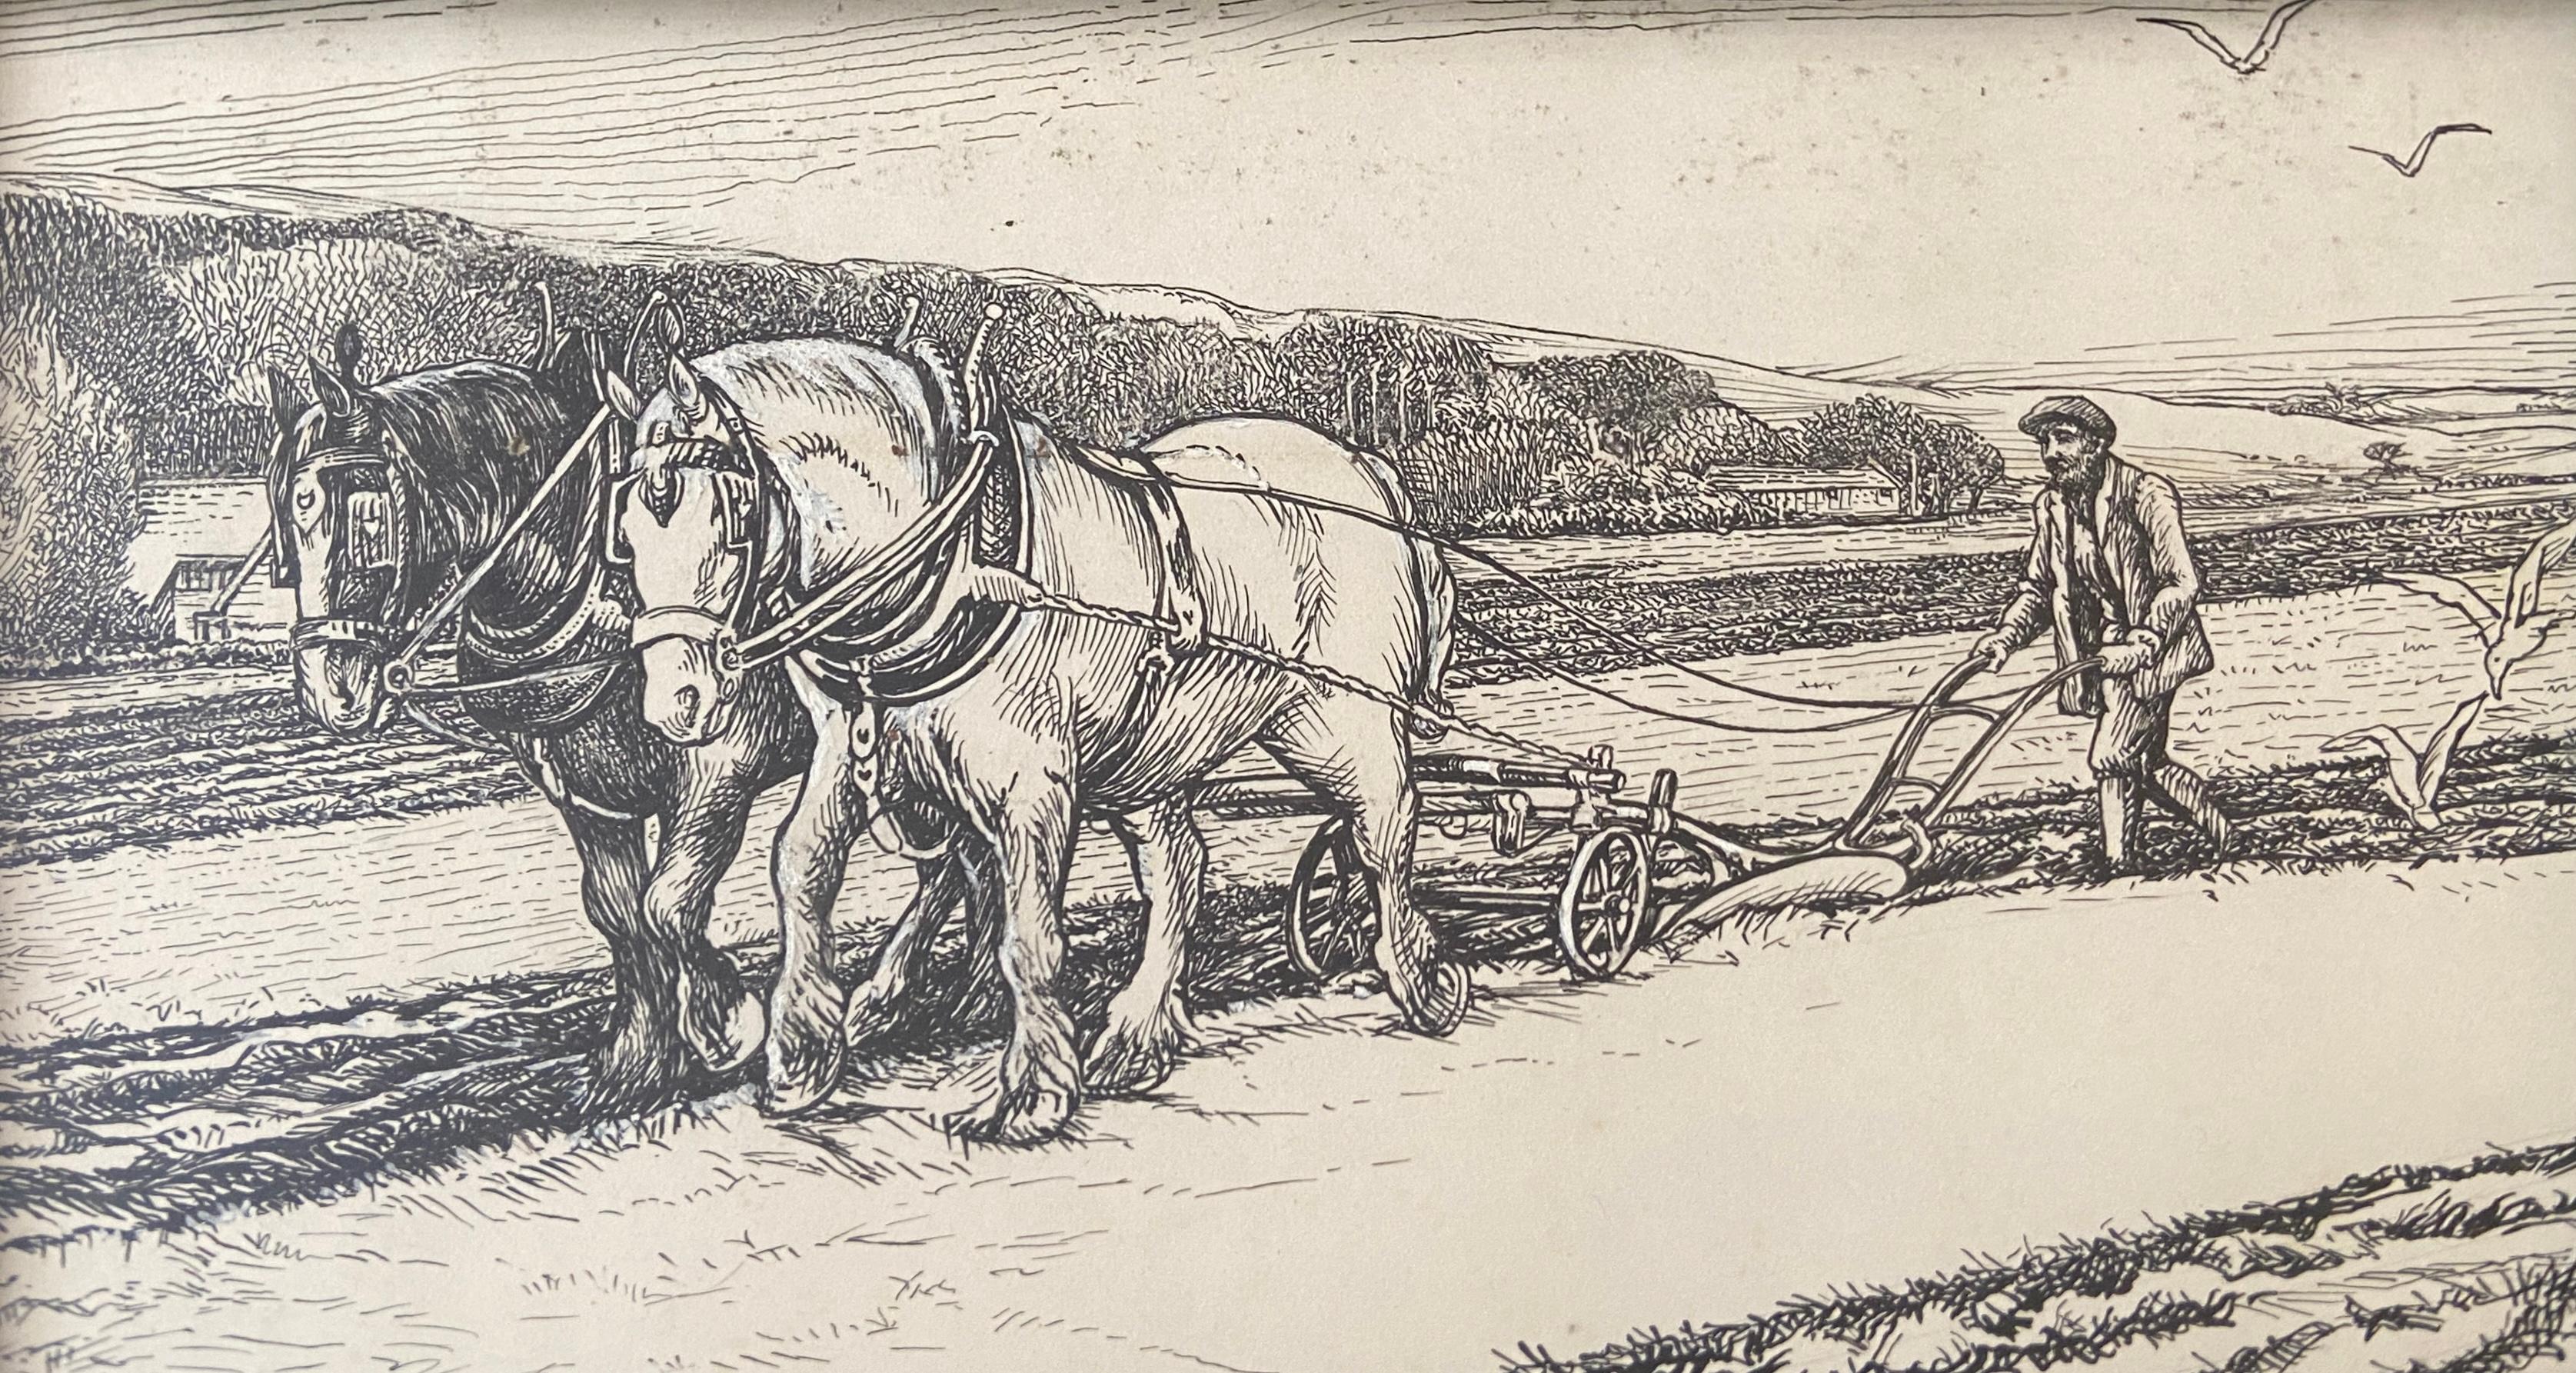 Ploughing, 20th century British ink on paper